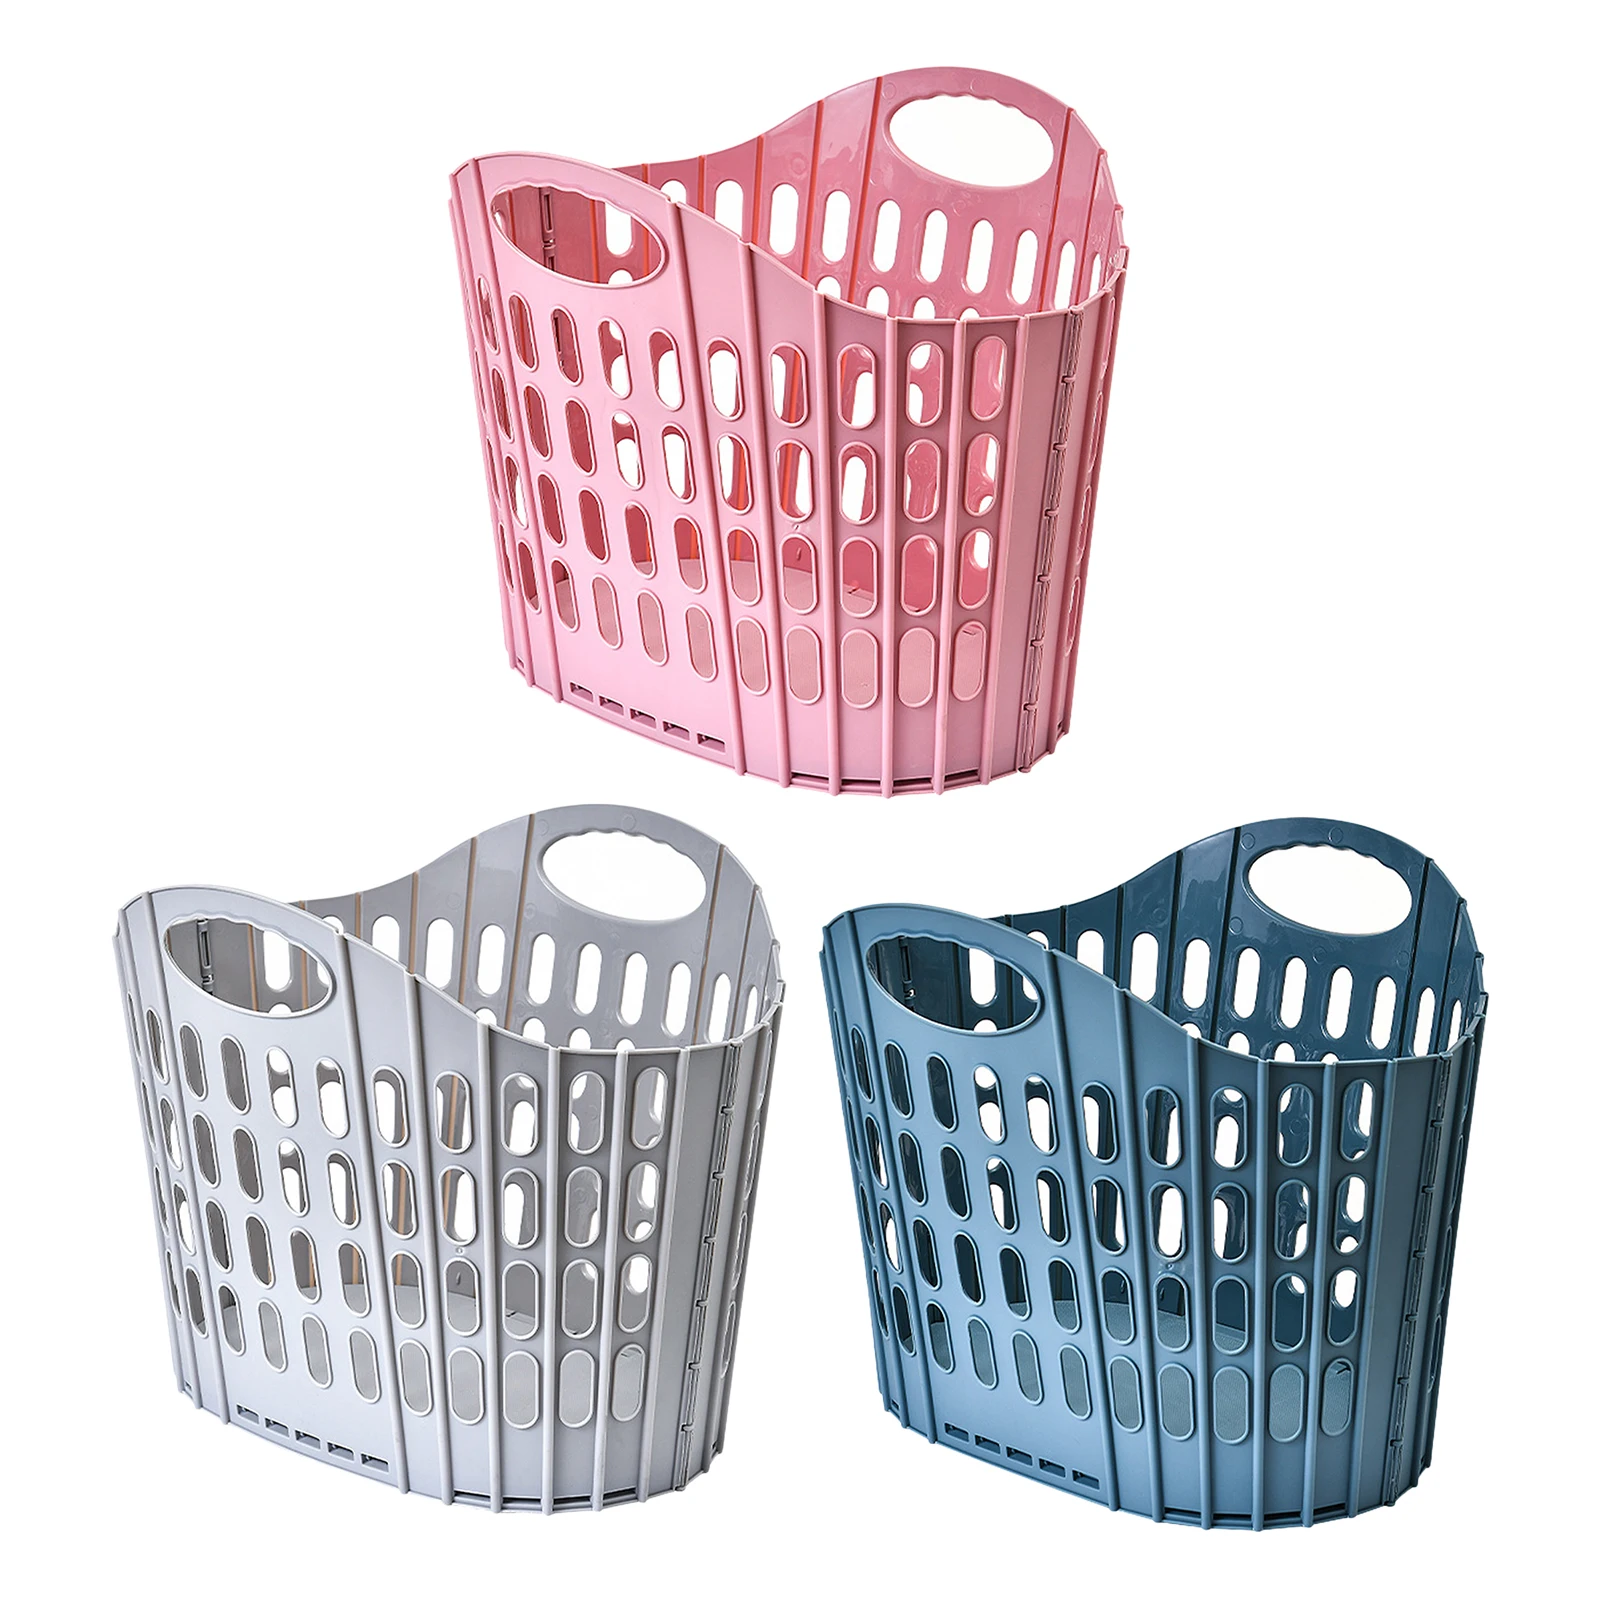 Yawinhe 72L Laundry Basket with Rope Handle Foldable Laundry Hamper Clothes Hamper Collapsible Storage Bin for Bathroom,Toys and Clothing Organization Blue, 1-Pack 